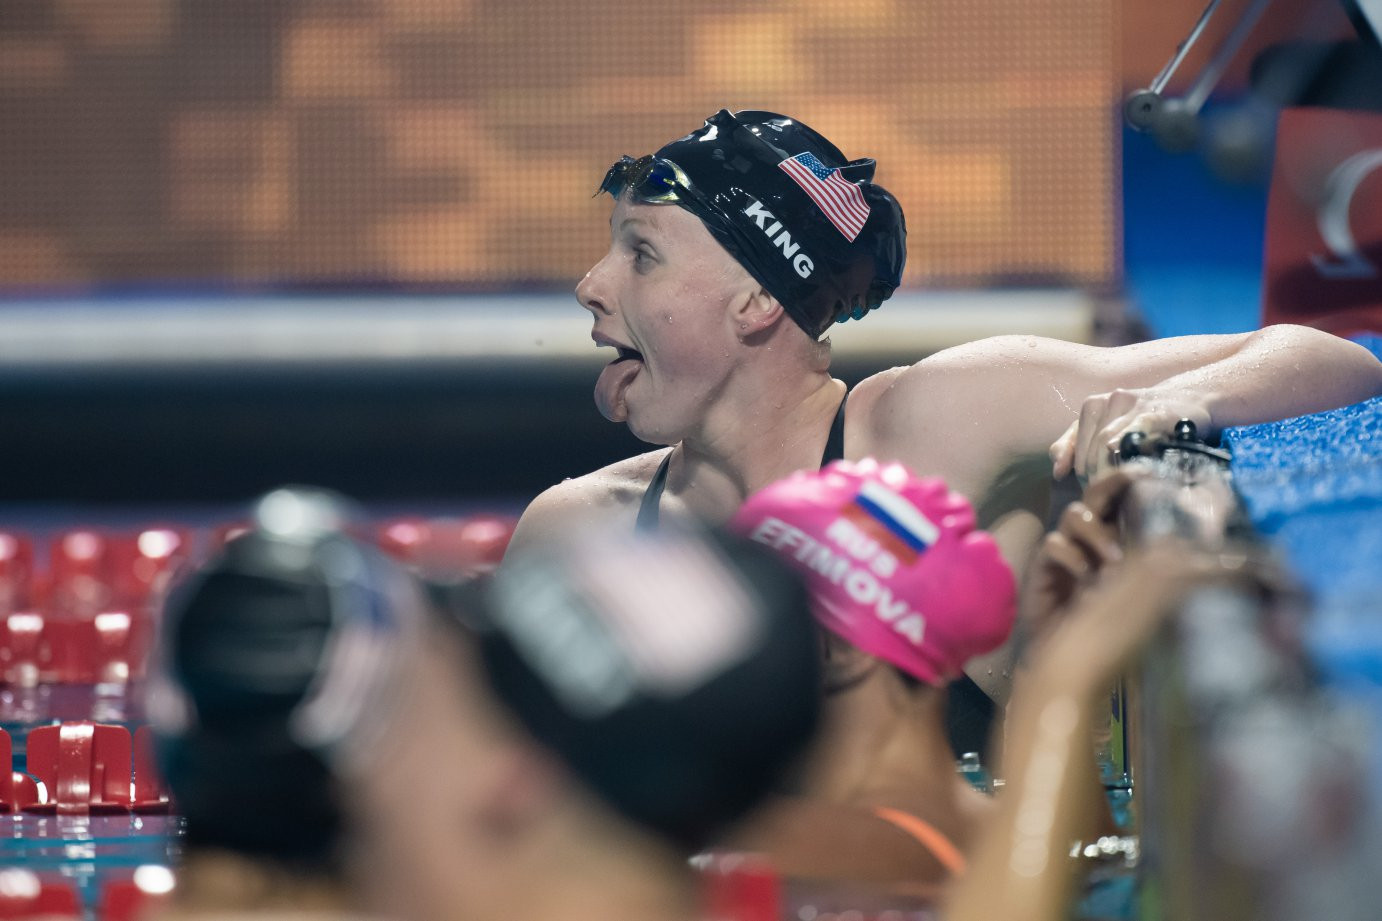 Double delight for King as she beats Efimova in FINA Champions Swim Series finale in home Indianapolis pool